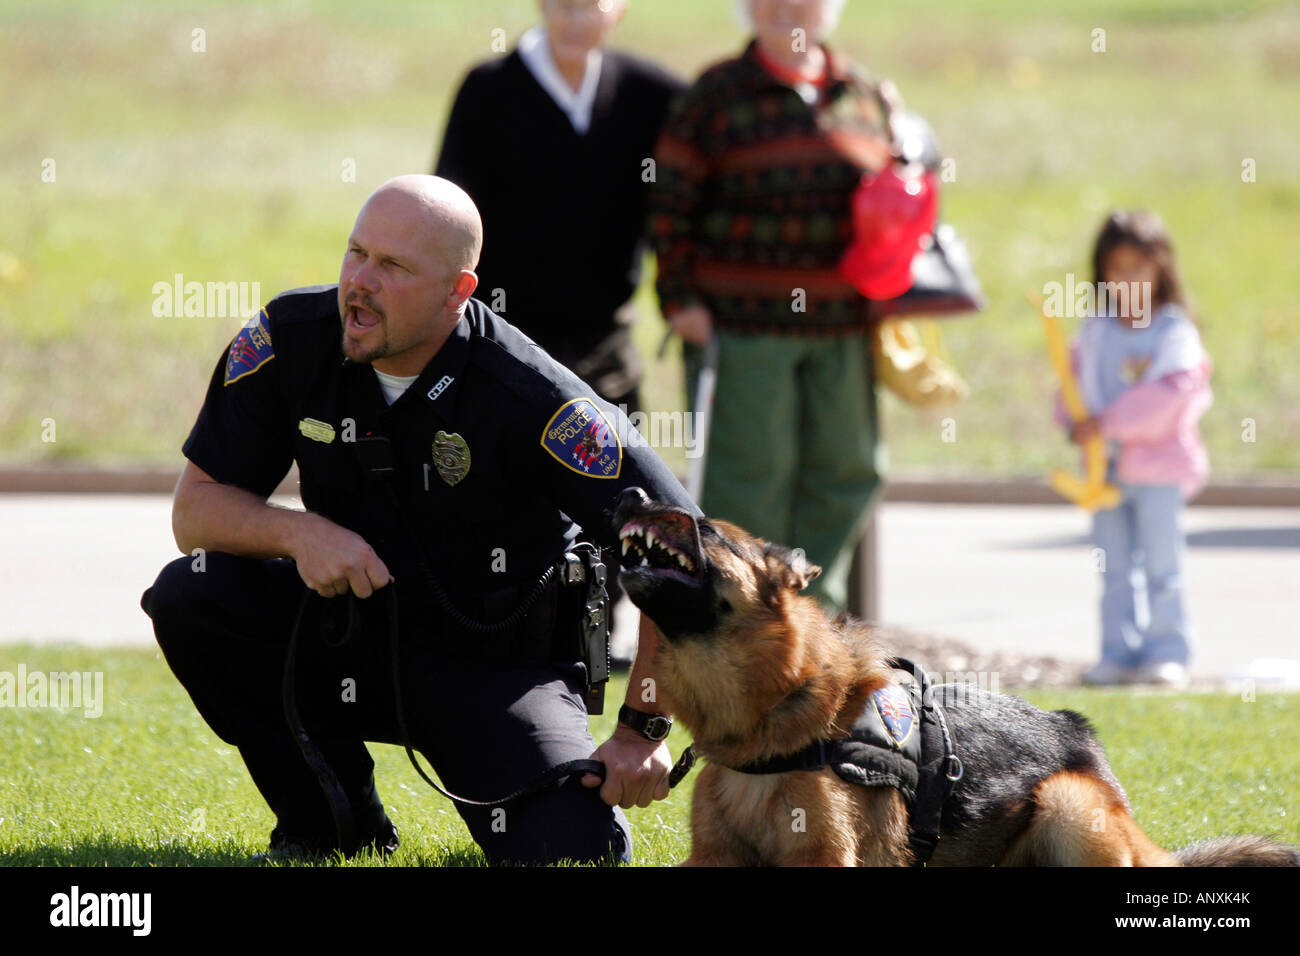 Police Officer with his K 9 partner yelling at a suspect while the dog continues to bark at a demonstration at a safety fair Stock Photo